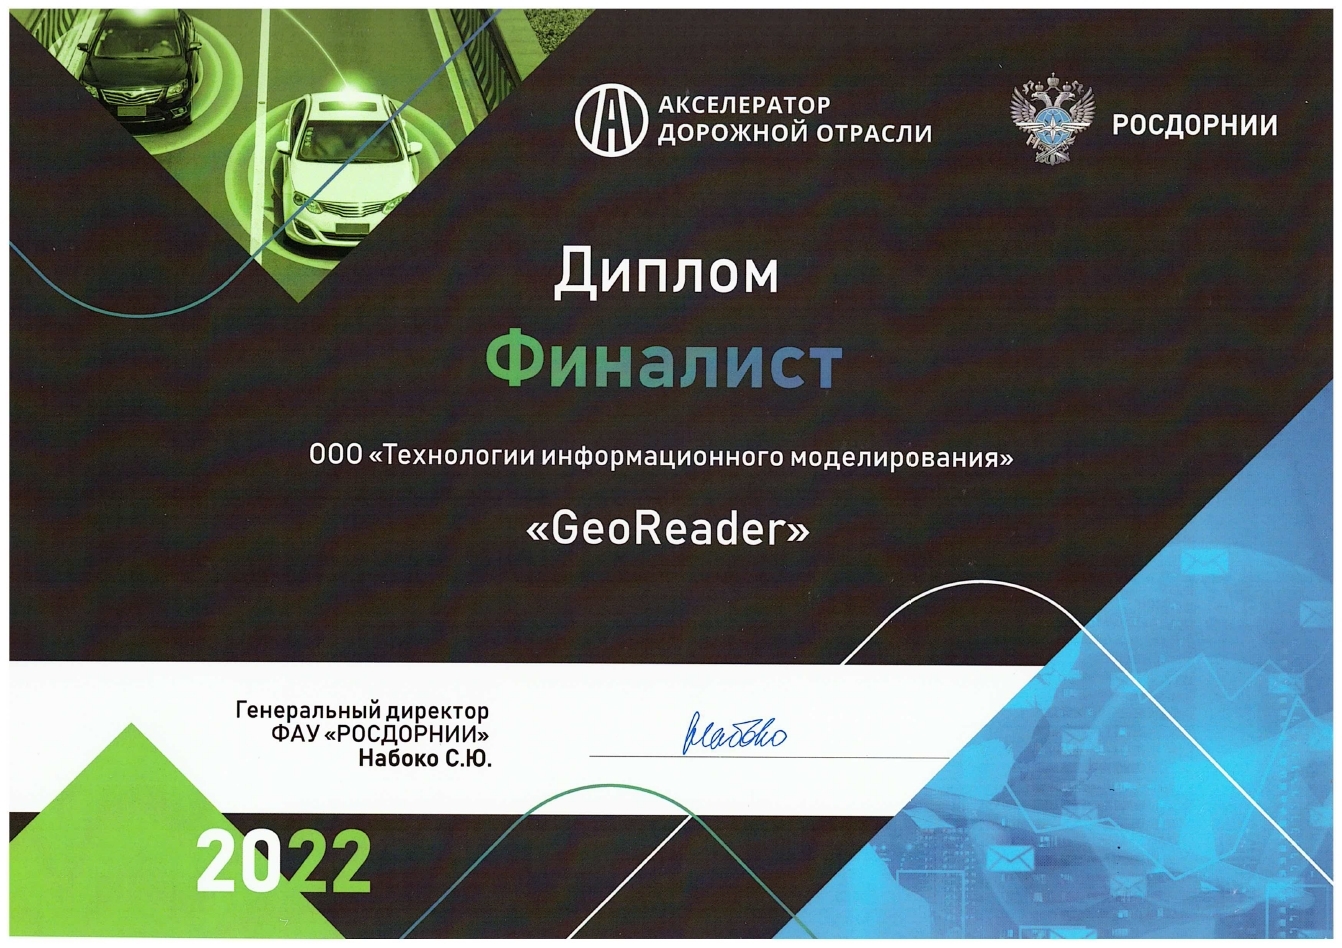 Diploma of the participant of the road industry accelerator of ROSDORNII